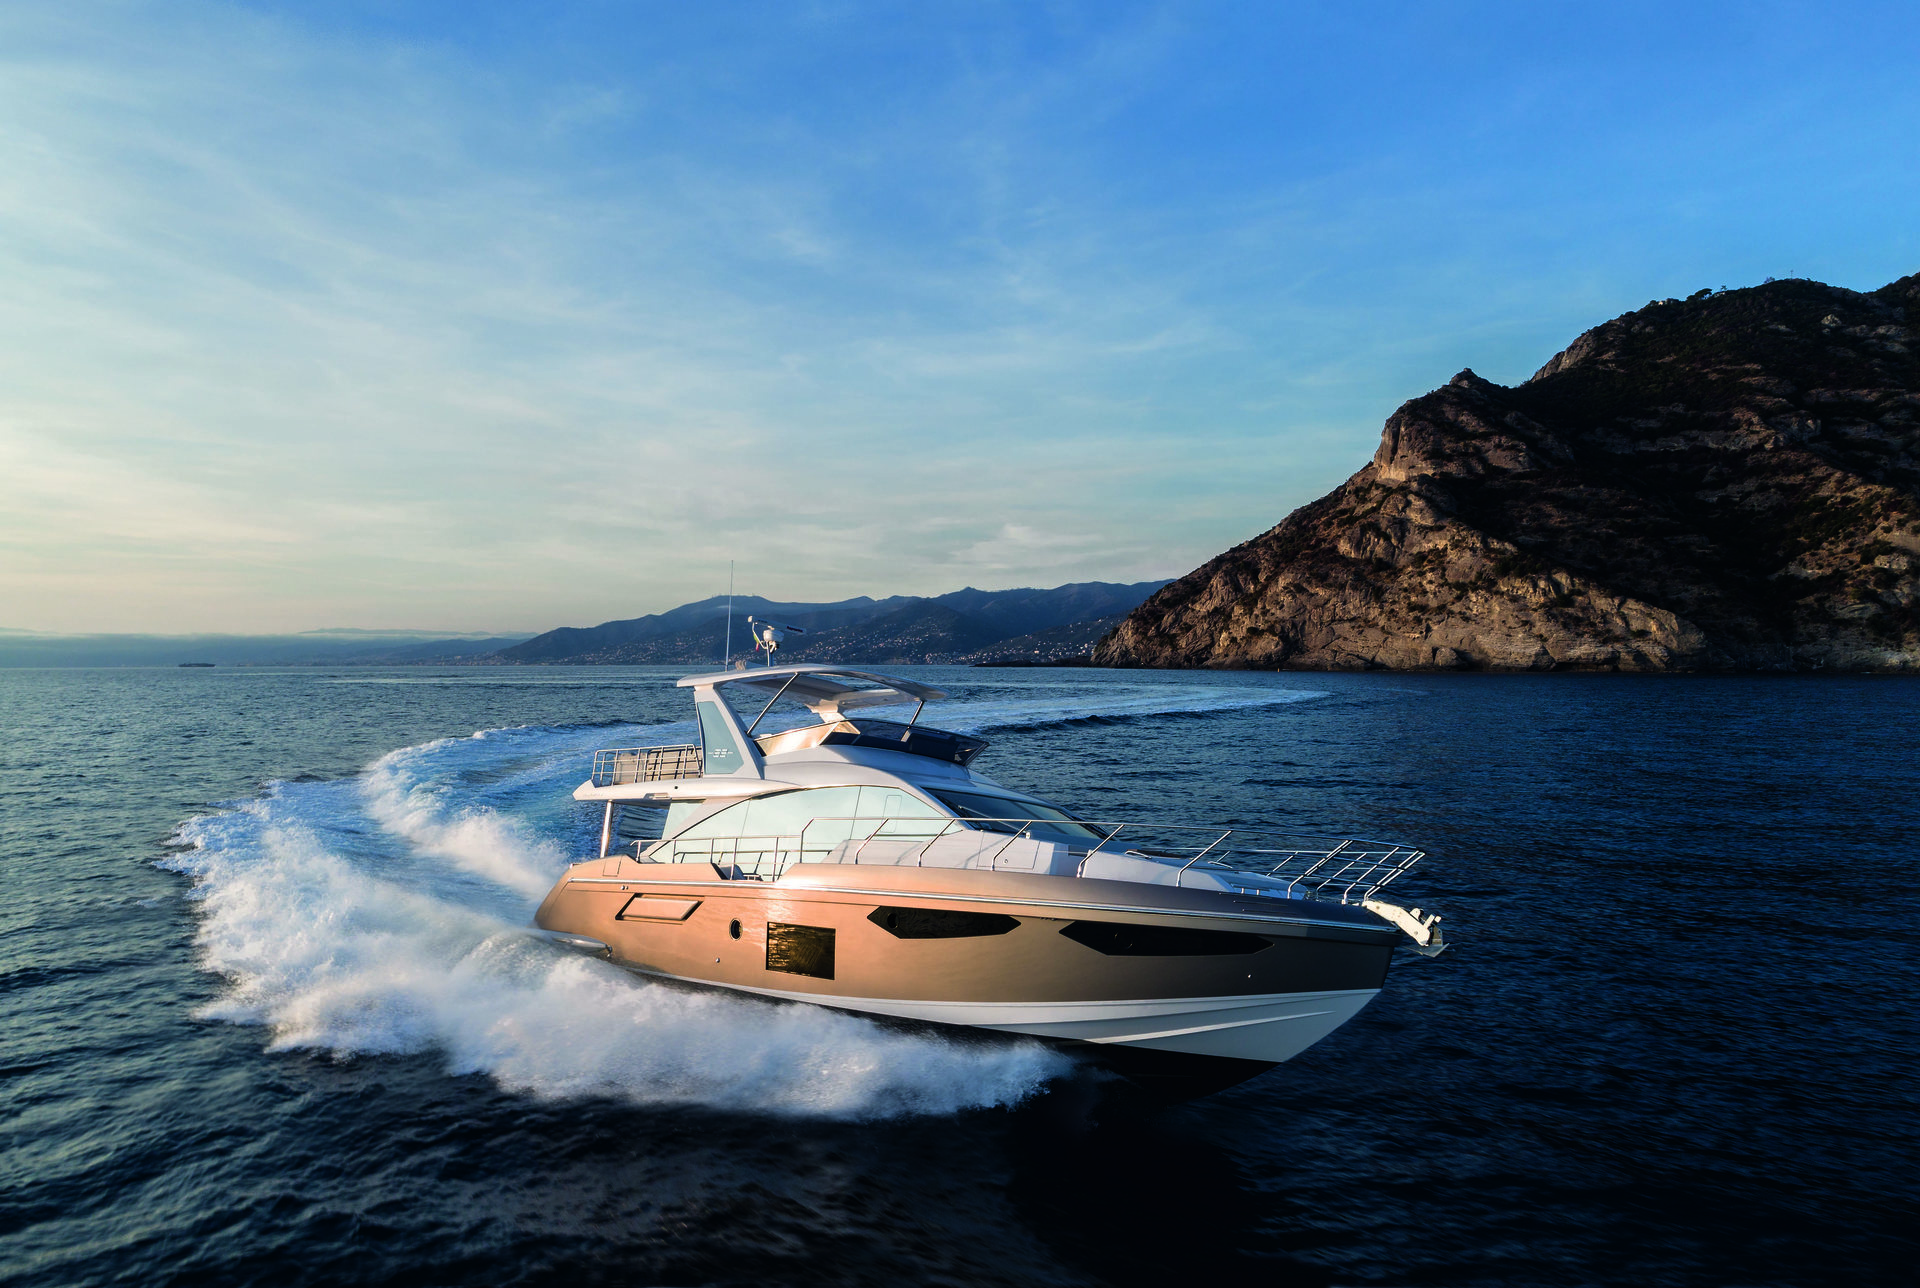 360 VR Virtual Tours of the Azimut Fly 62